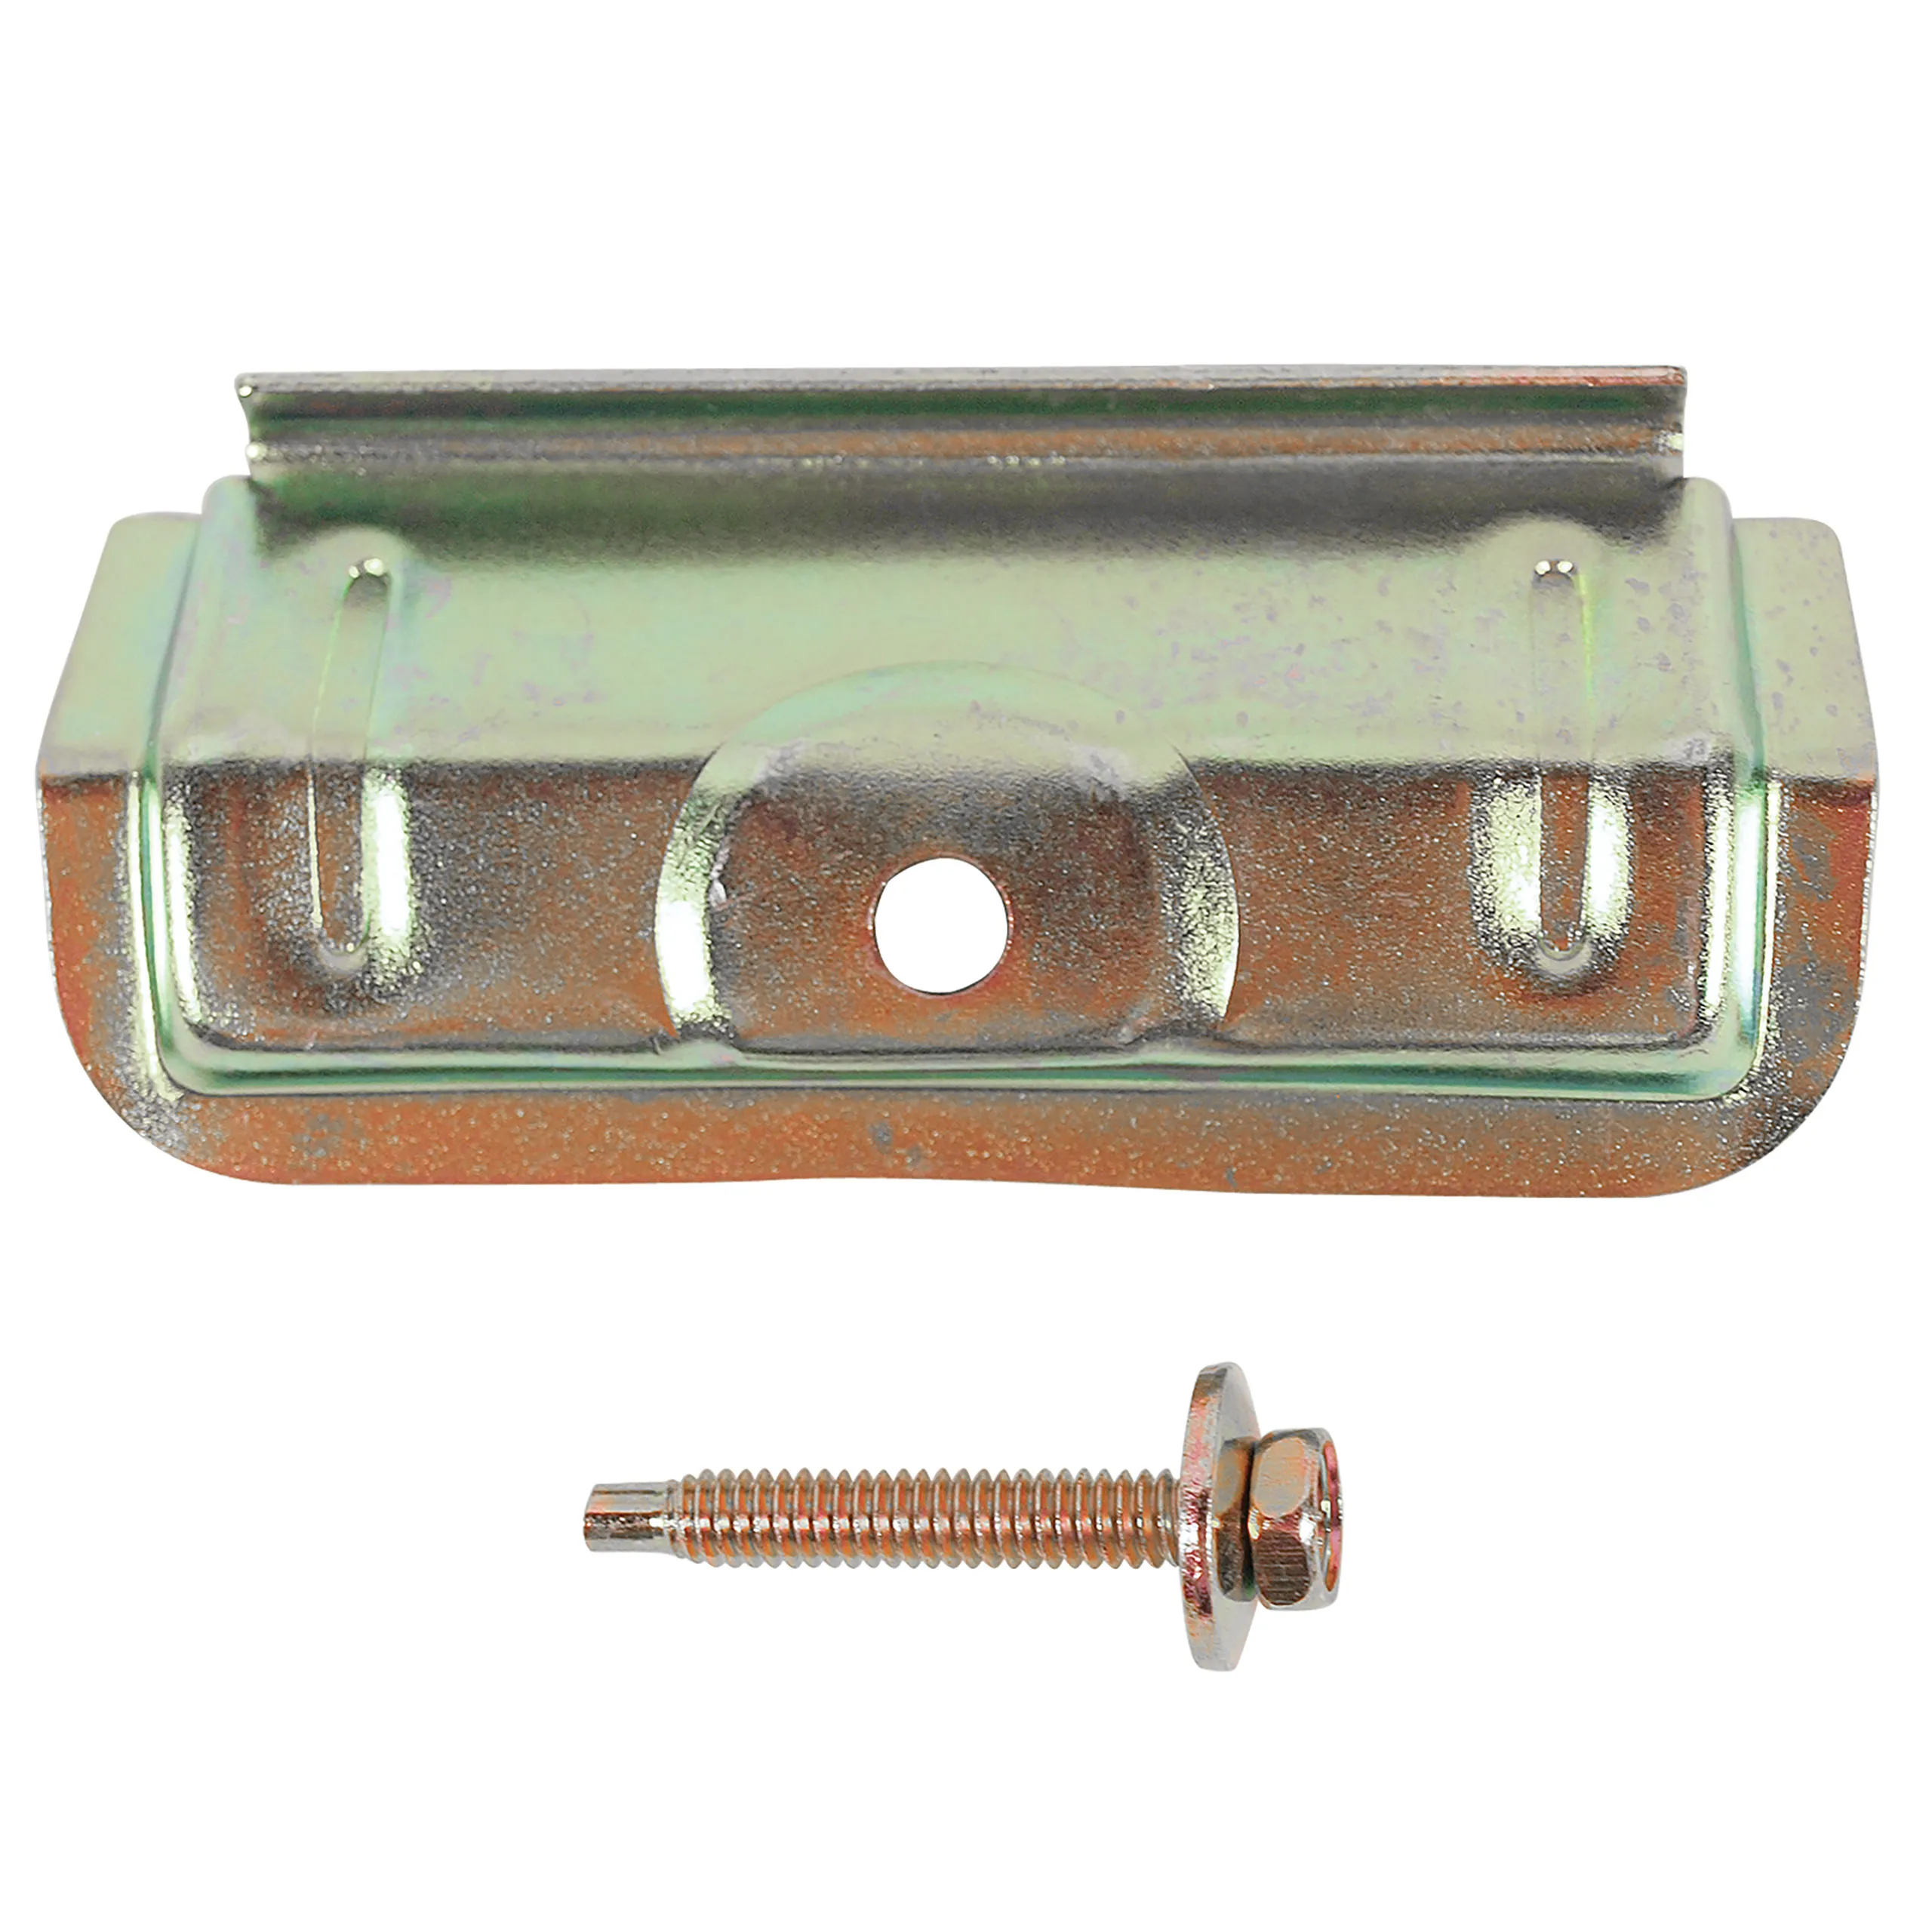 Third Generation 1979-1986 Ford Mustang Battery Hold Down - Daniel Carpenter